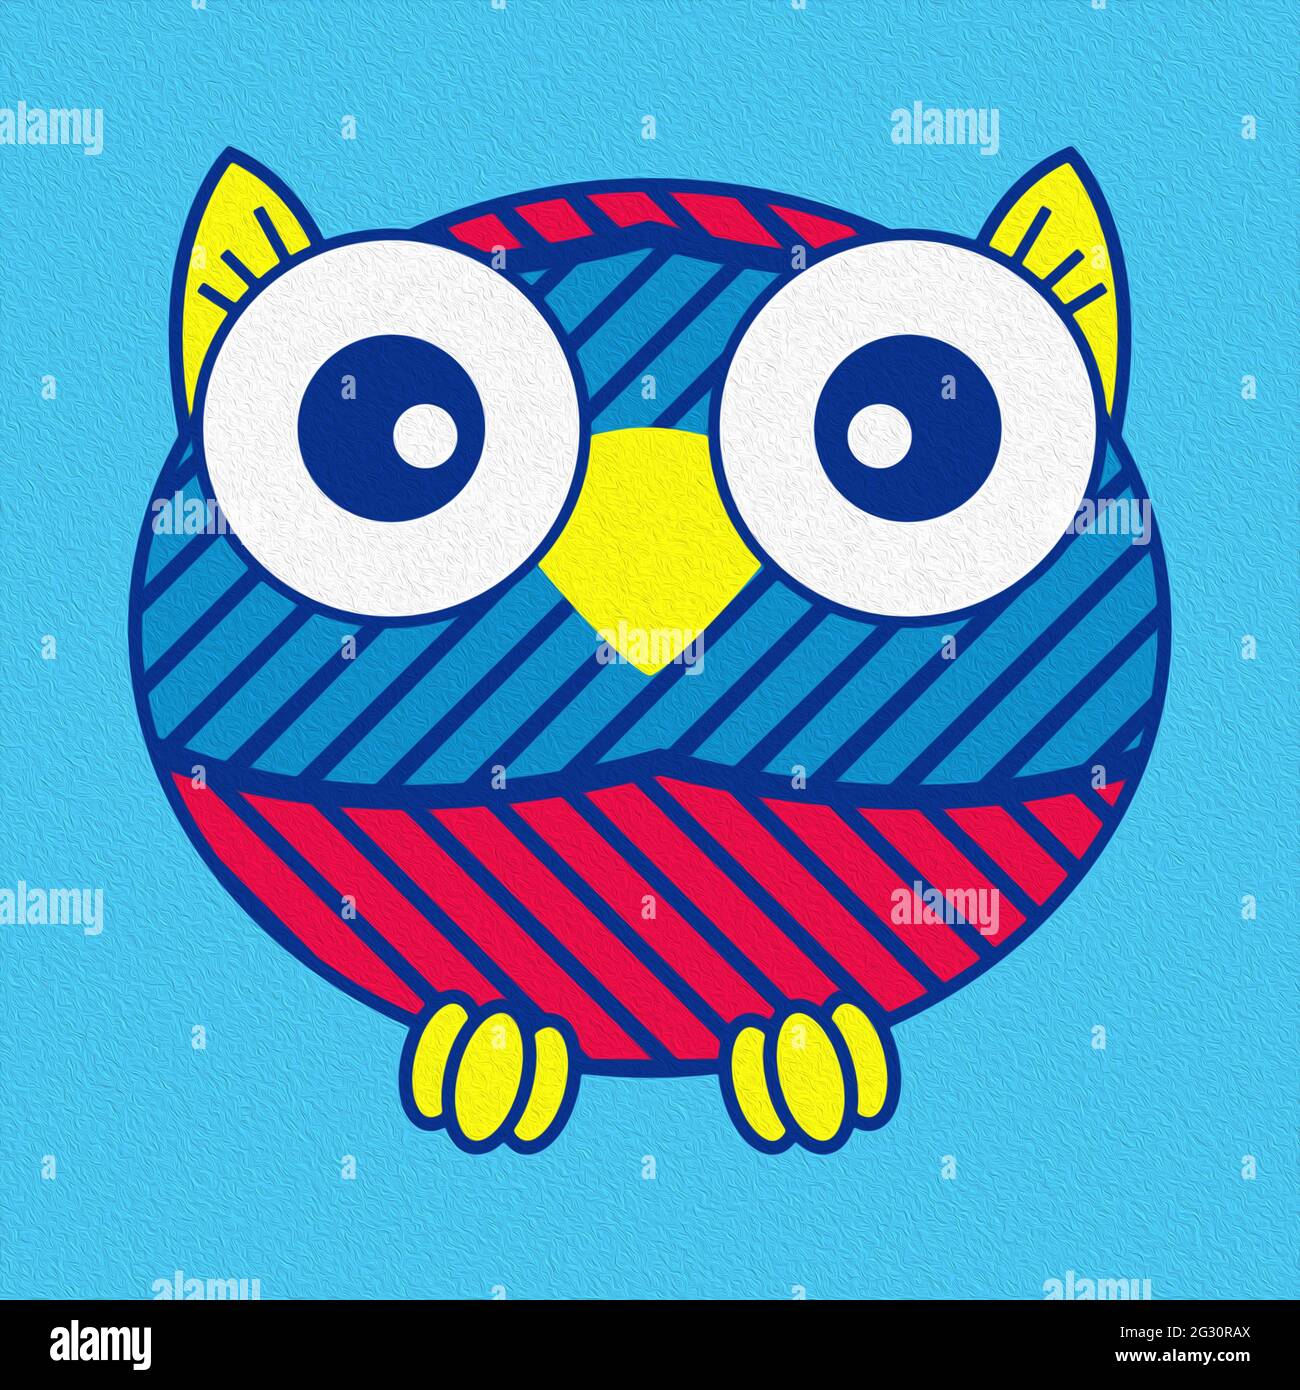 Illustration of a funny oval owl on blue background, made as an oil painting Stock Photo